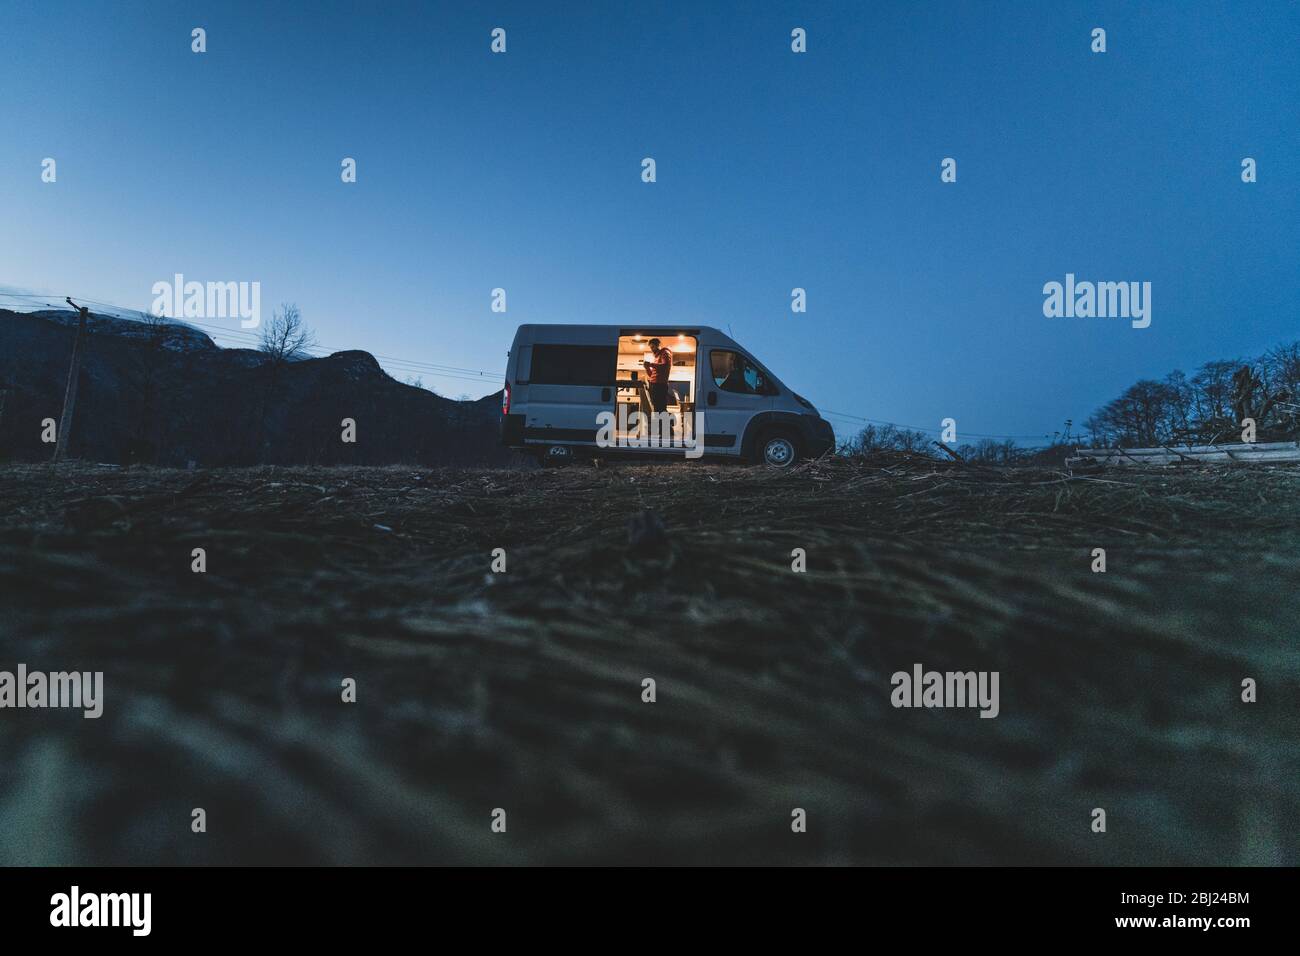 Campervan silhouetted on a hill in the evening with the lights on inside and a man standing by the open side door. Stock Photo